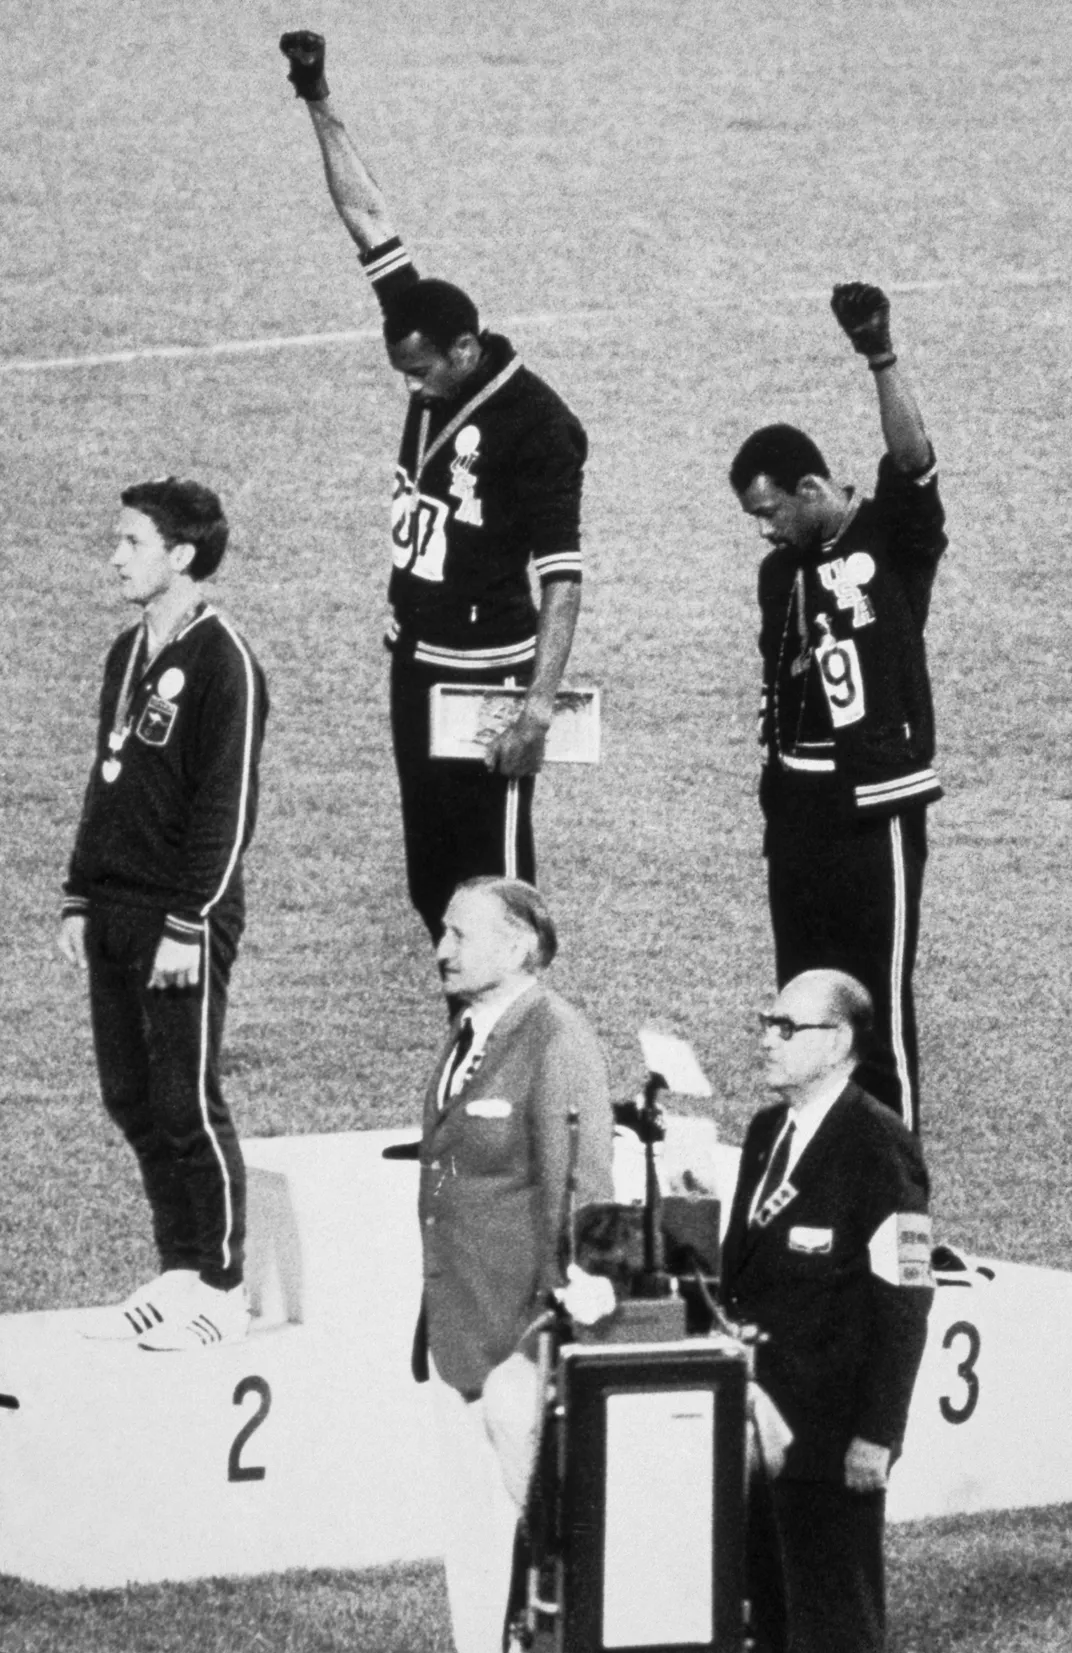 Athletes Tommie Smith (center) and John Carlos (right) raise clenched fists during the medal ceremony for the 200-meter dash at the 1968 Summer Olympics in Mexico City.